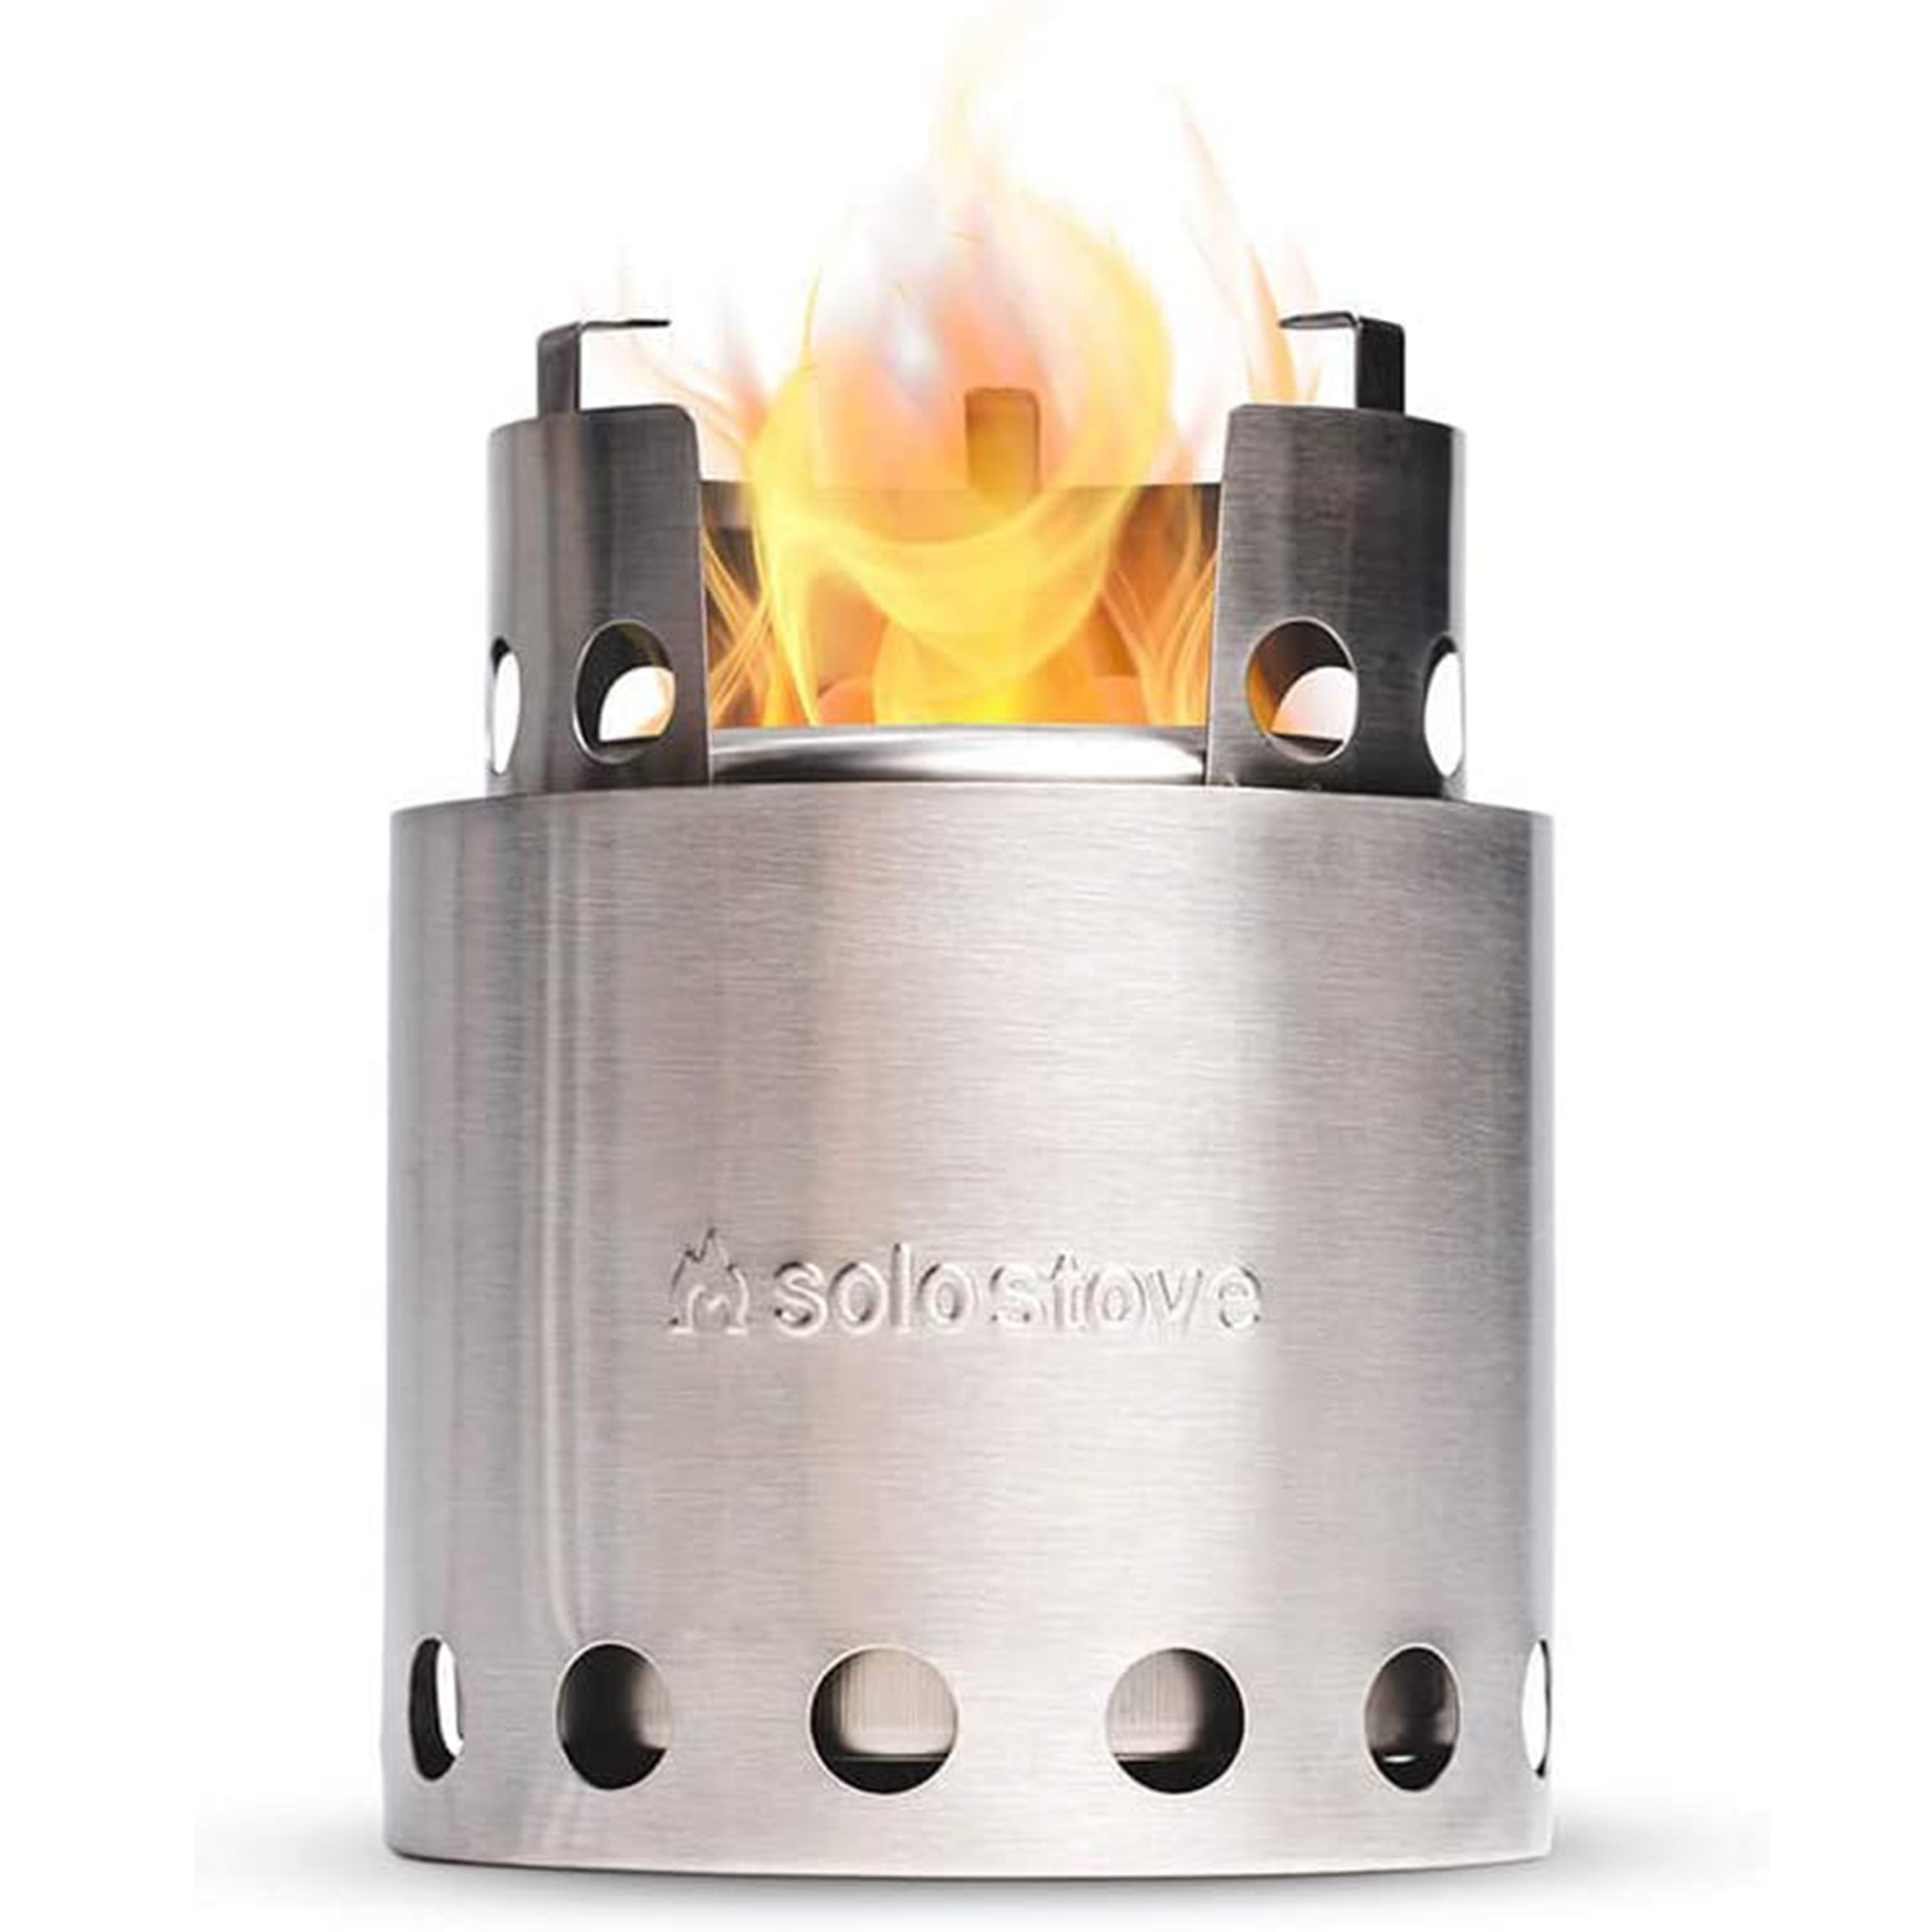 Solo Stove Lite, Portable Camping Hiking and Survival Stove, Powerful Efficient Wood Burning and Low Smoke, 1-2 People, 304 Stainless Steel, Compact 5.7"x4.2" and Lightweight 9 oz